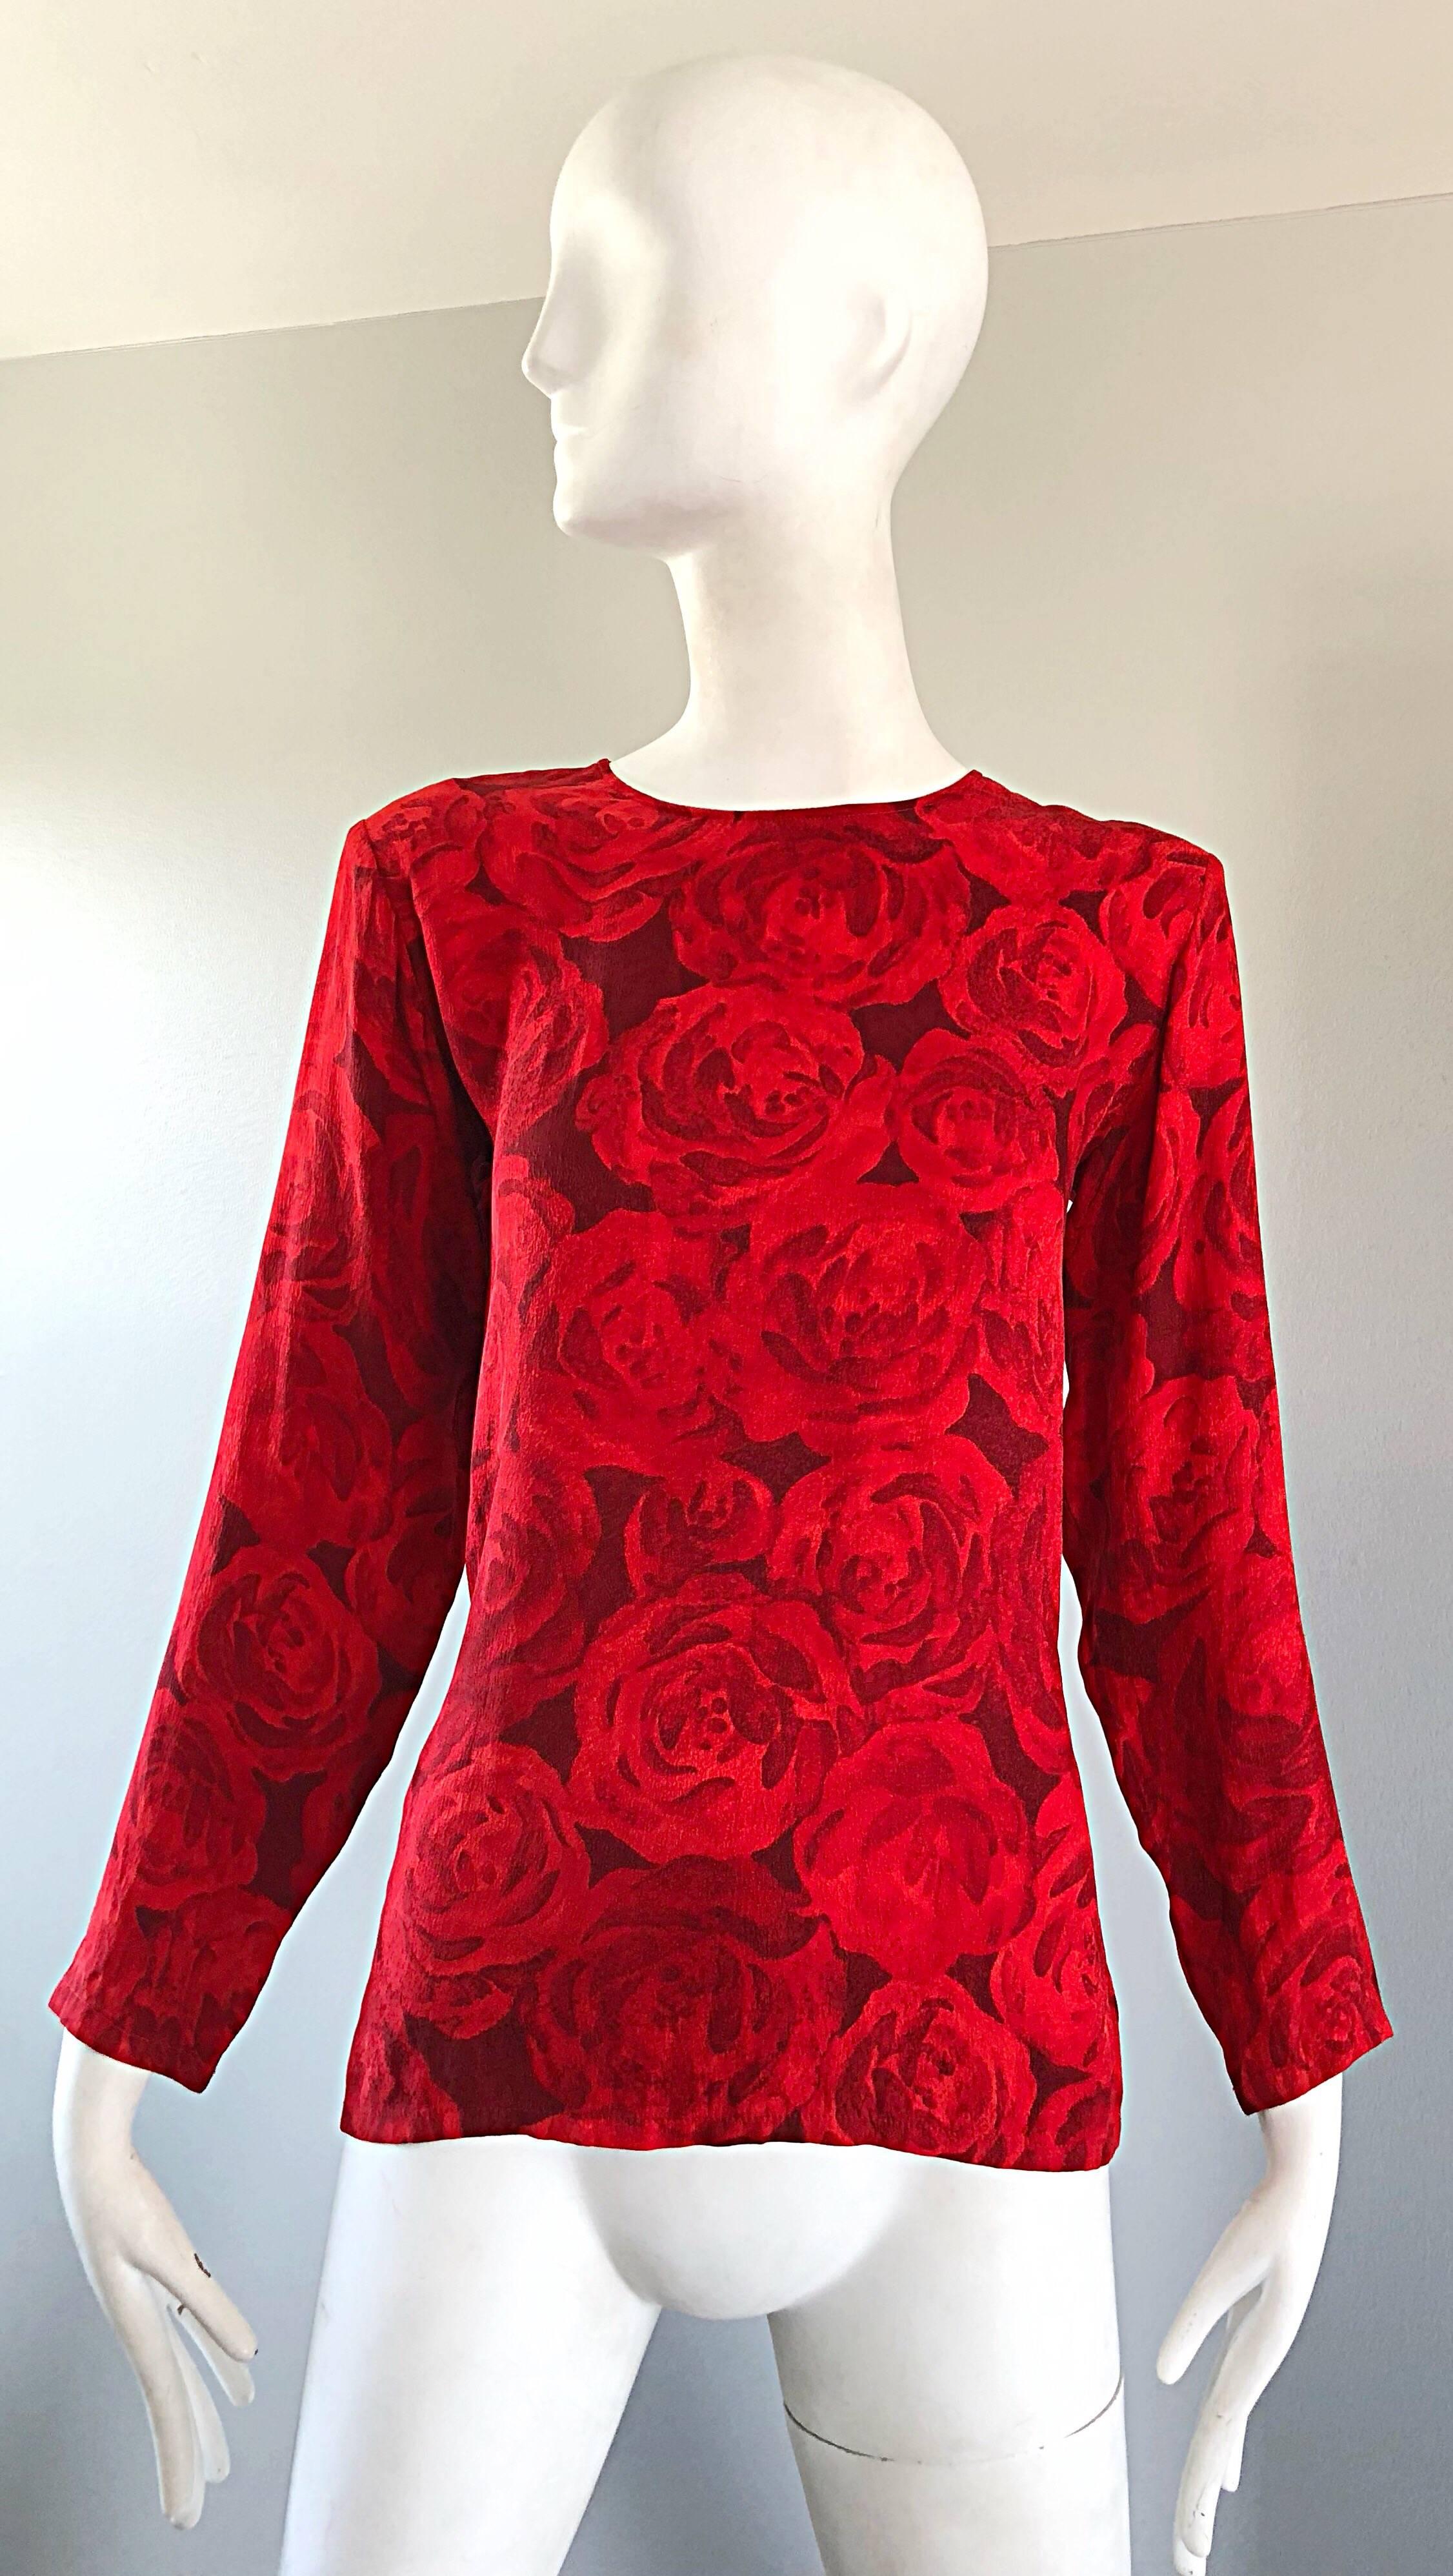 Beautiful 1990s YSL YVES SAINT LAURENT 'Rive Gauche' lipstick red rose print long sleeve silk blouse! Features a gorgeous rose print with a wonderfully tailore fit. Simply slips over the head with a single button closure at top back neck. Can easily